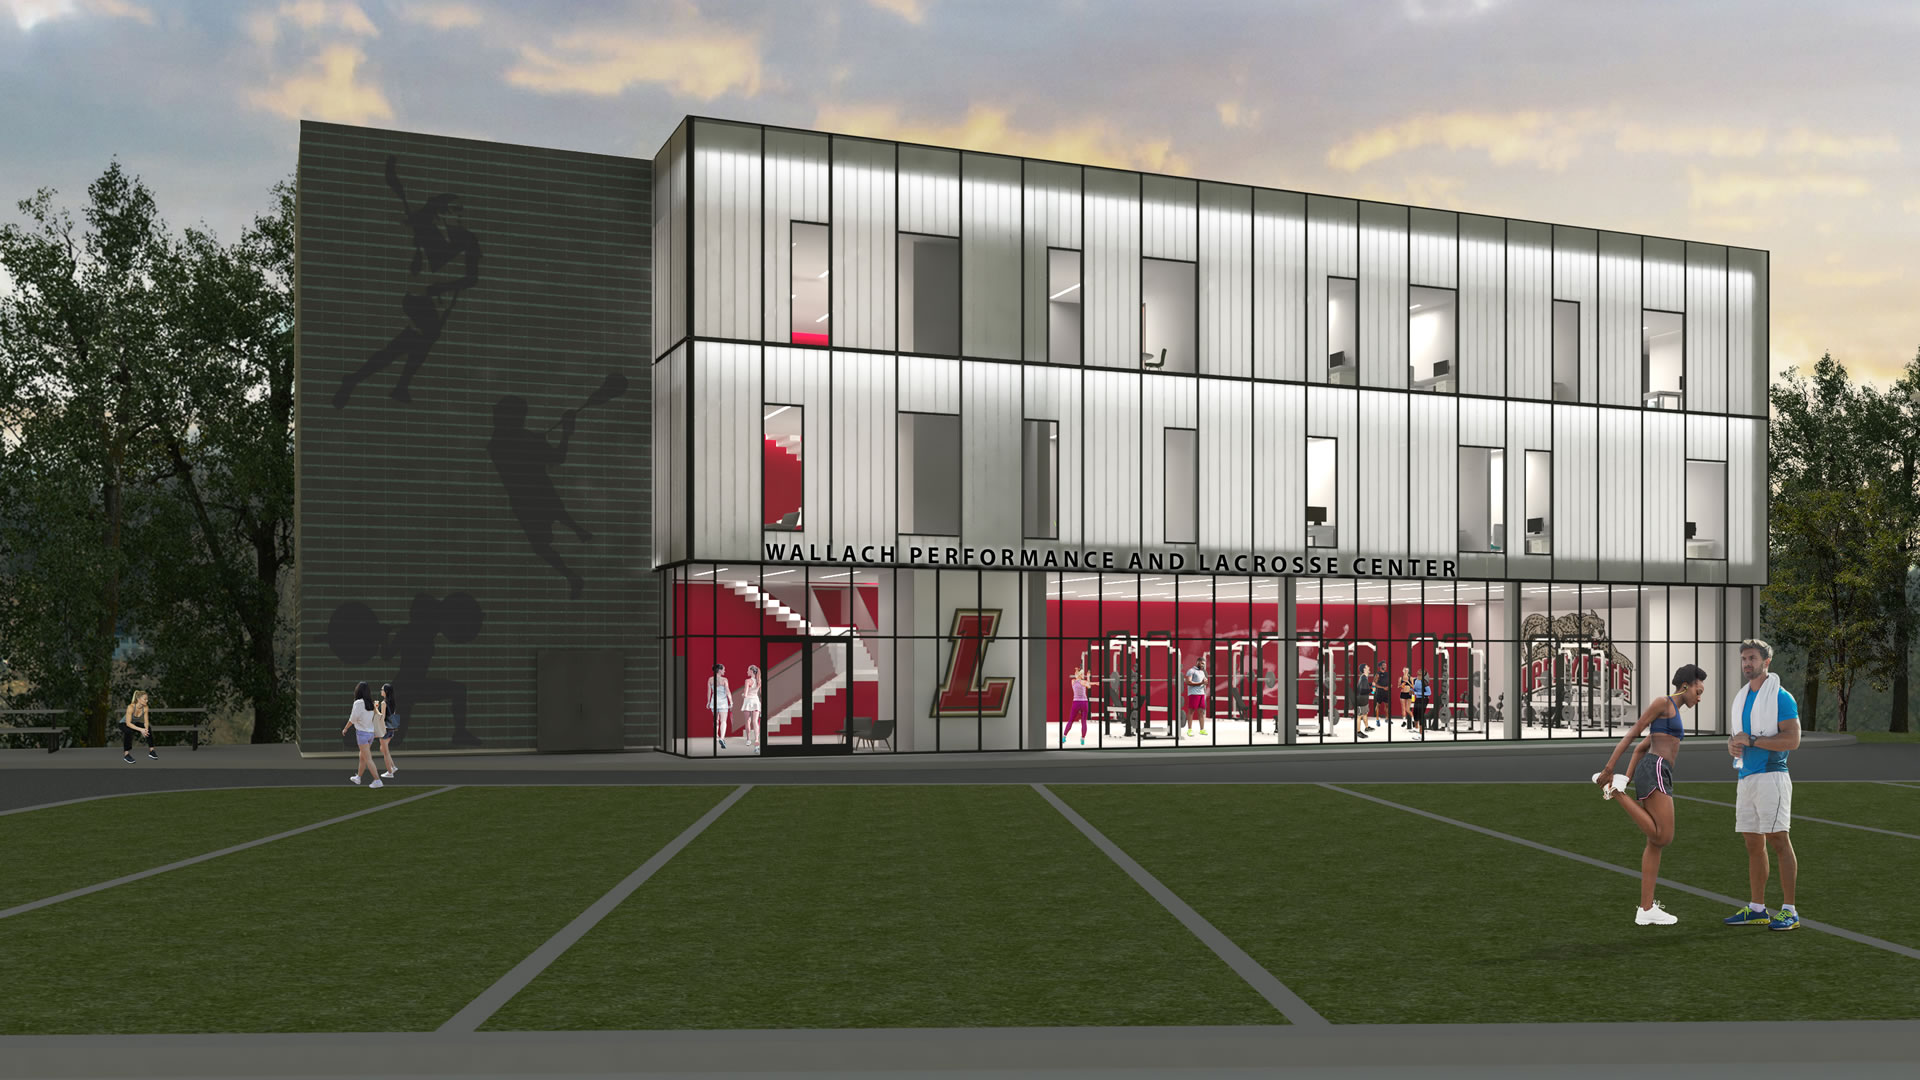 Wallach Sports Performance and Lacrosse Center at Lafayette University